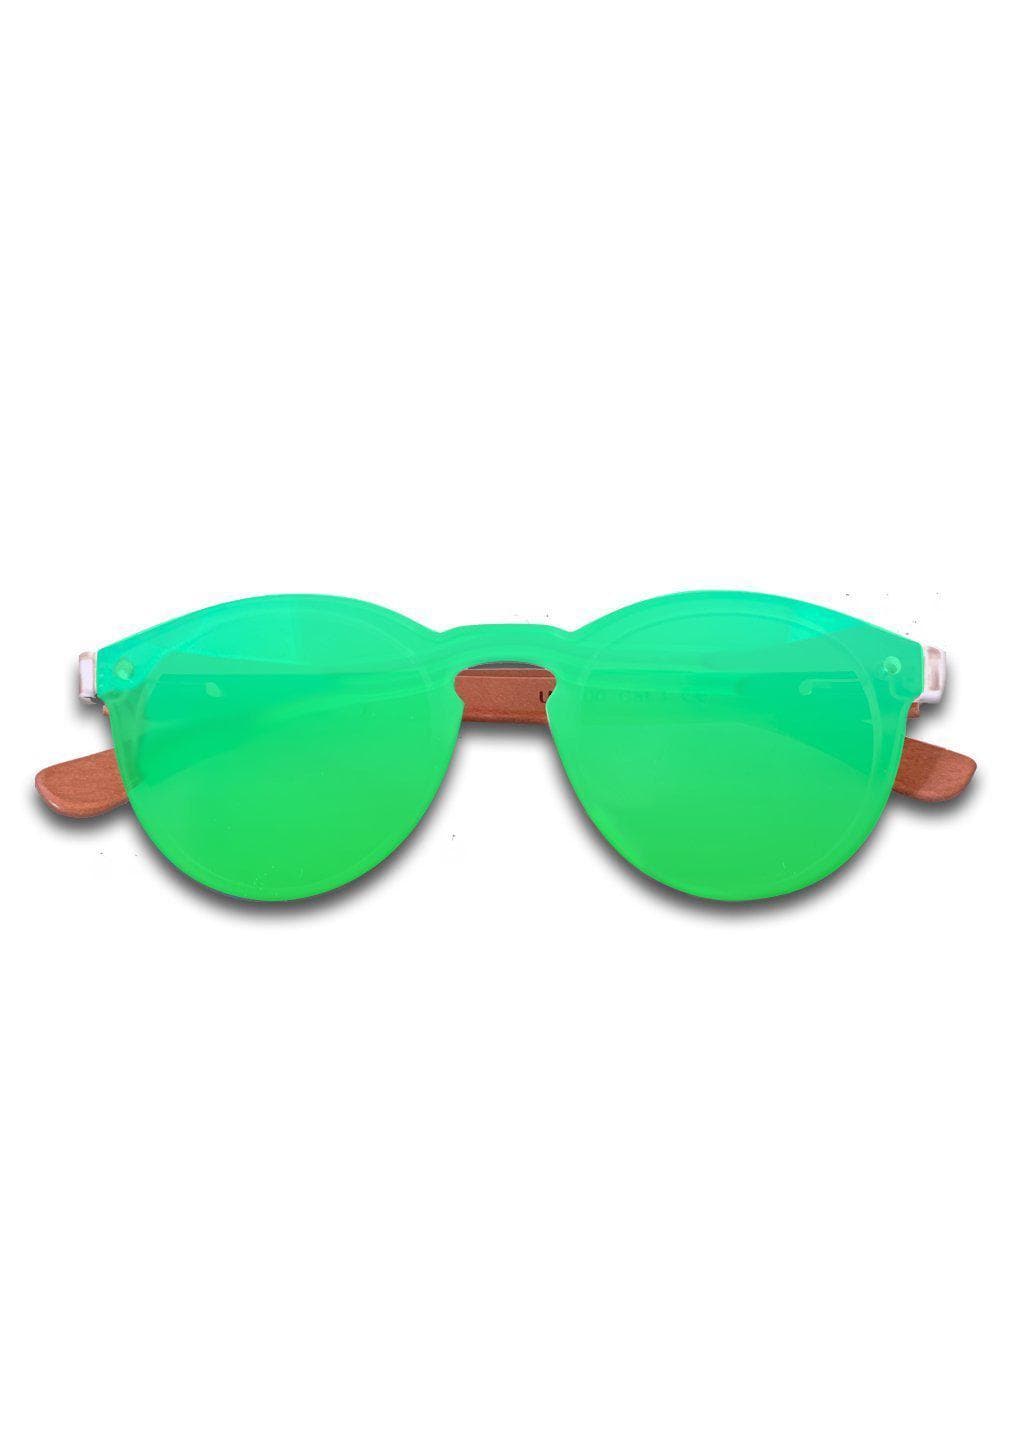 Eyewood Tomorrow - Aries - Our wooden sunglasses for the future.